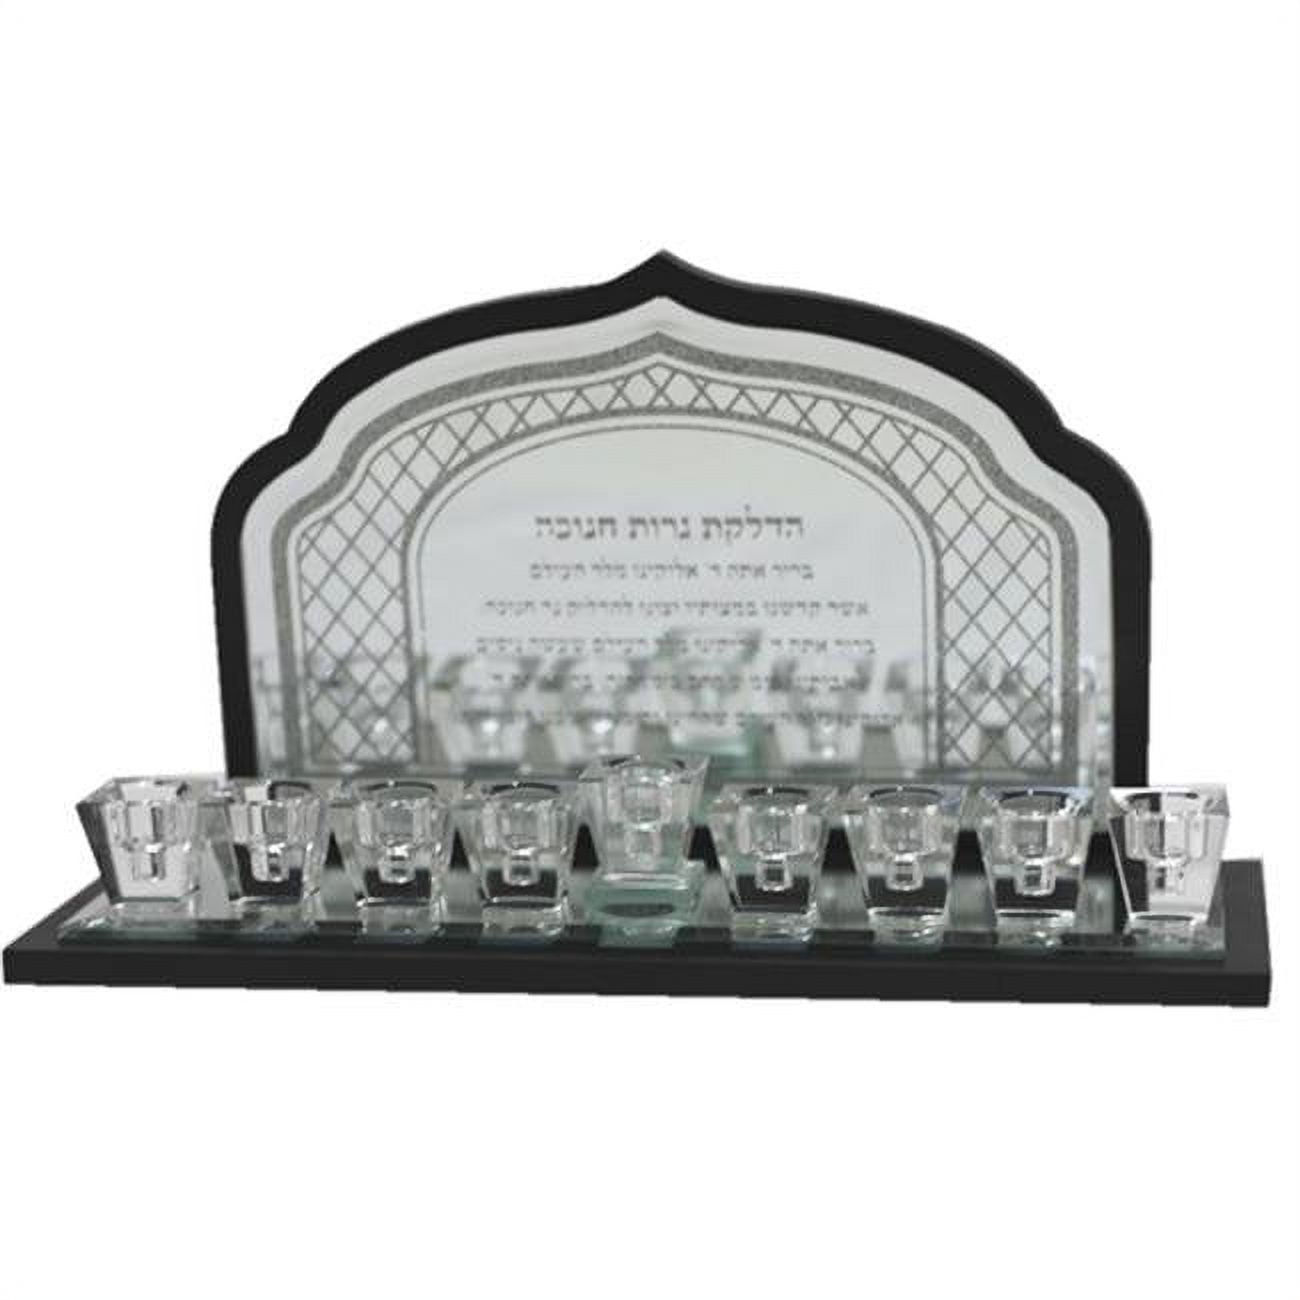 Picture of A&M Judaica & Gifts 57342 11.8 x 6.5 in. Crystal & Wood Menorah Candle Lighting